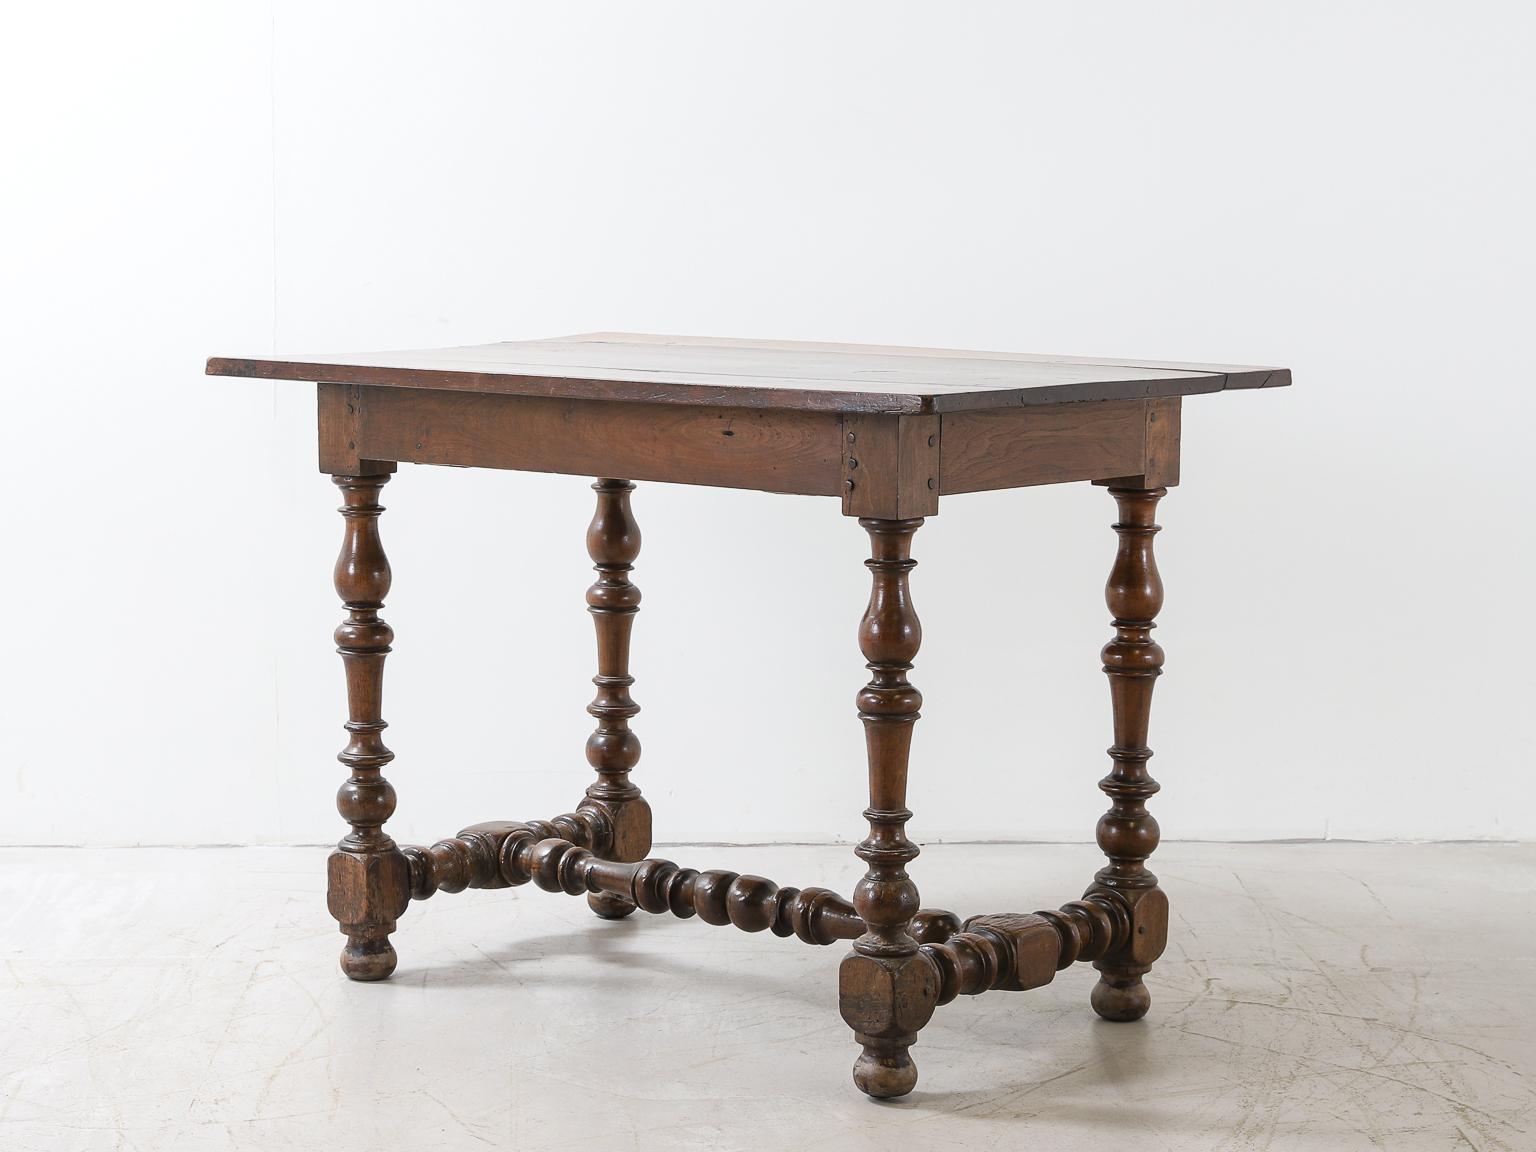 European Early 18th Century Oak Single Drawer Table with Turned Legs For Sale